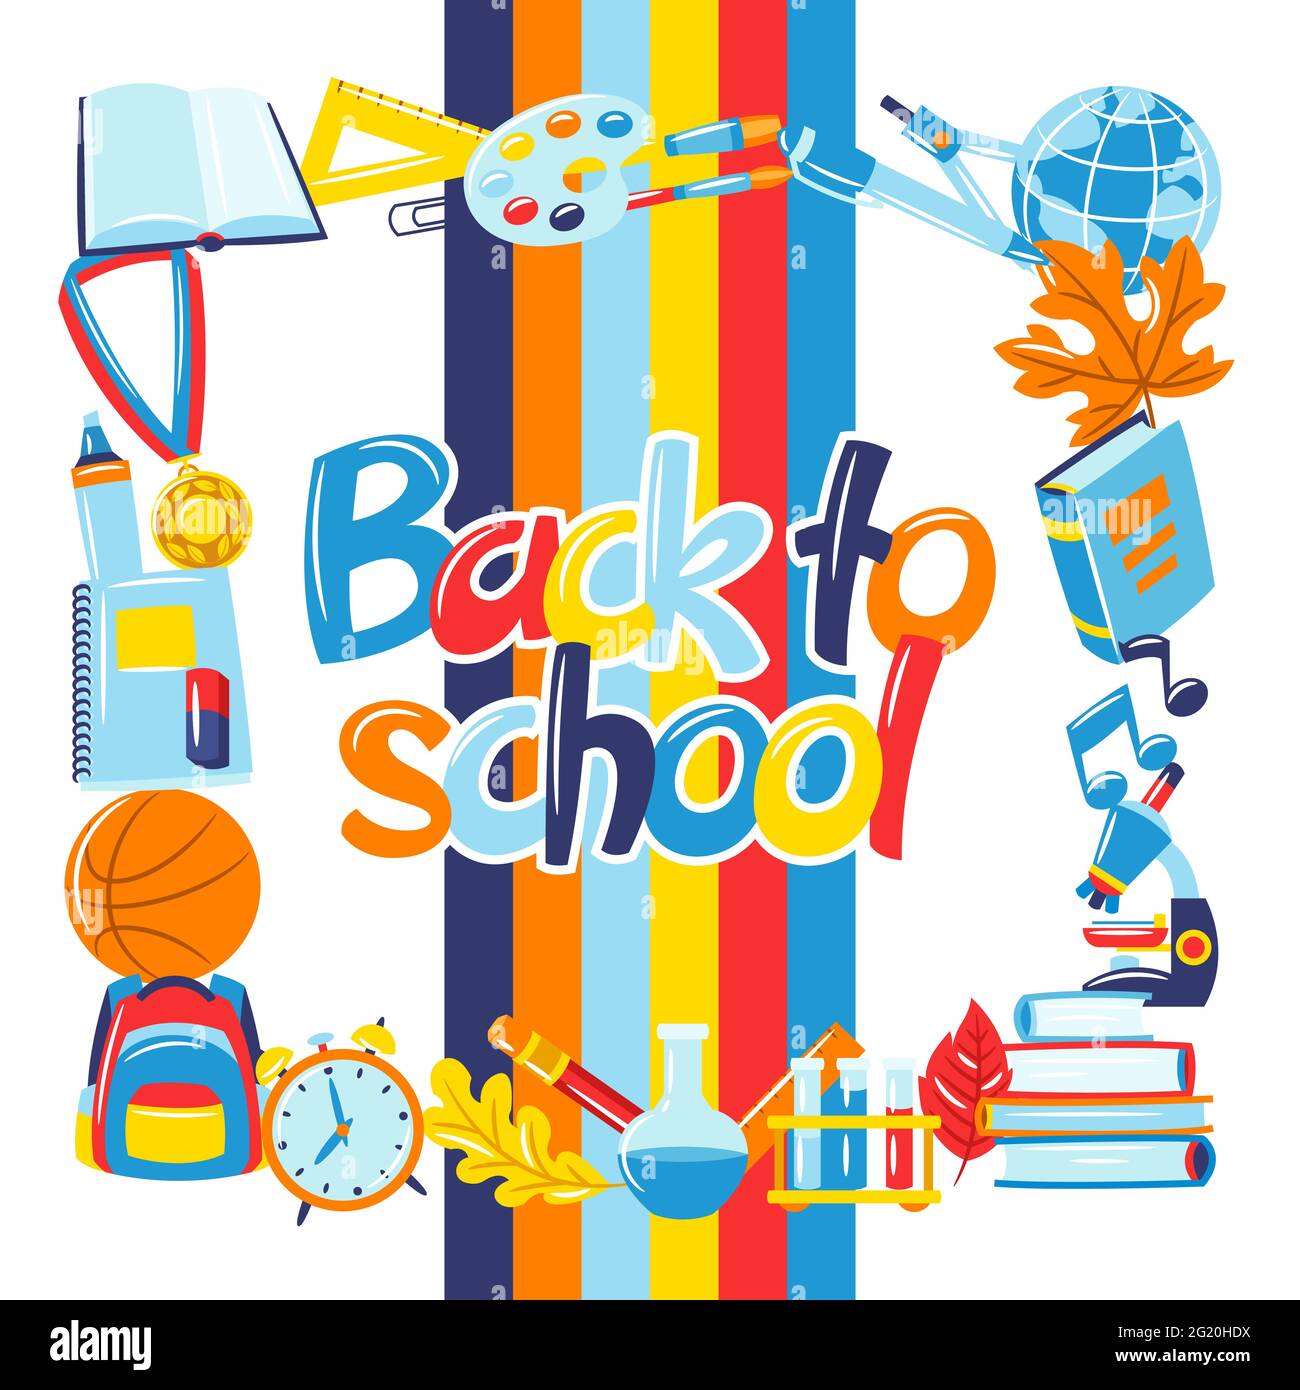 School background with education items. Illustration of supplies and stationery. Stock Vector